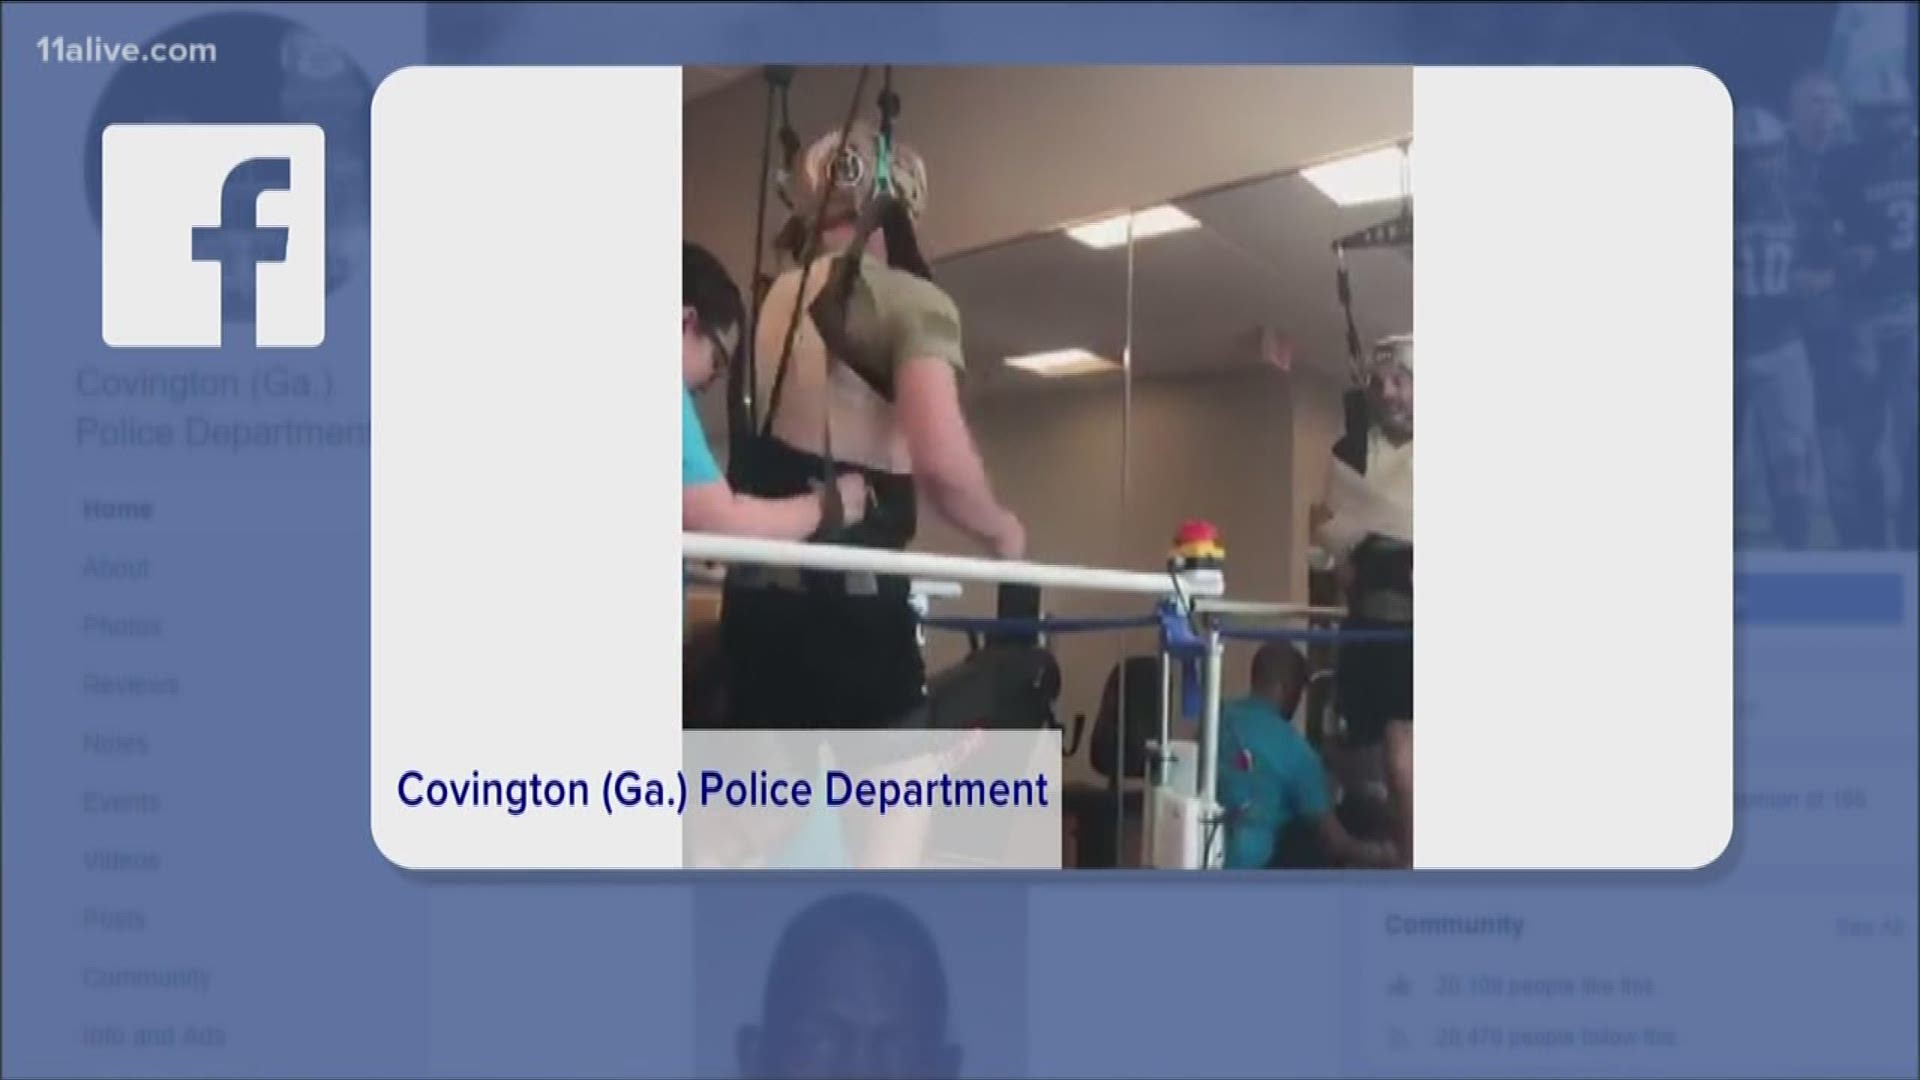 The police department posted a video on its Facebook page of Matt Cooper being assisted by others on the treadmill.